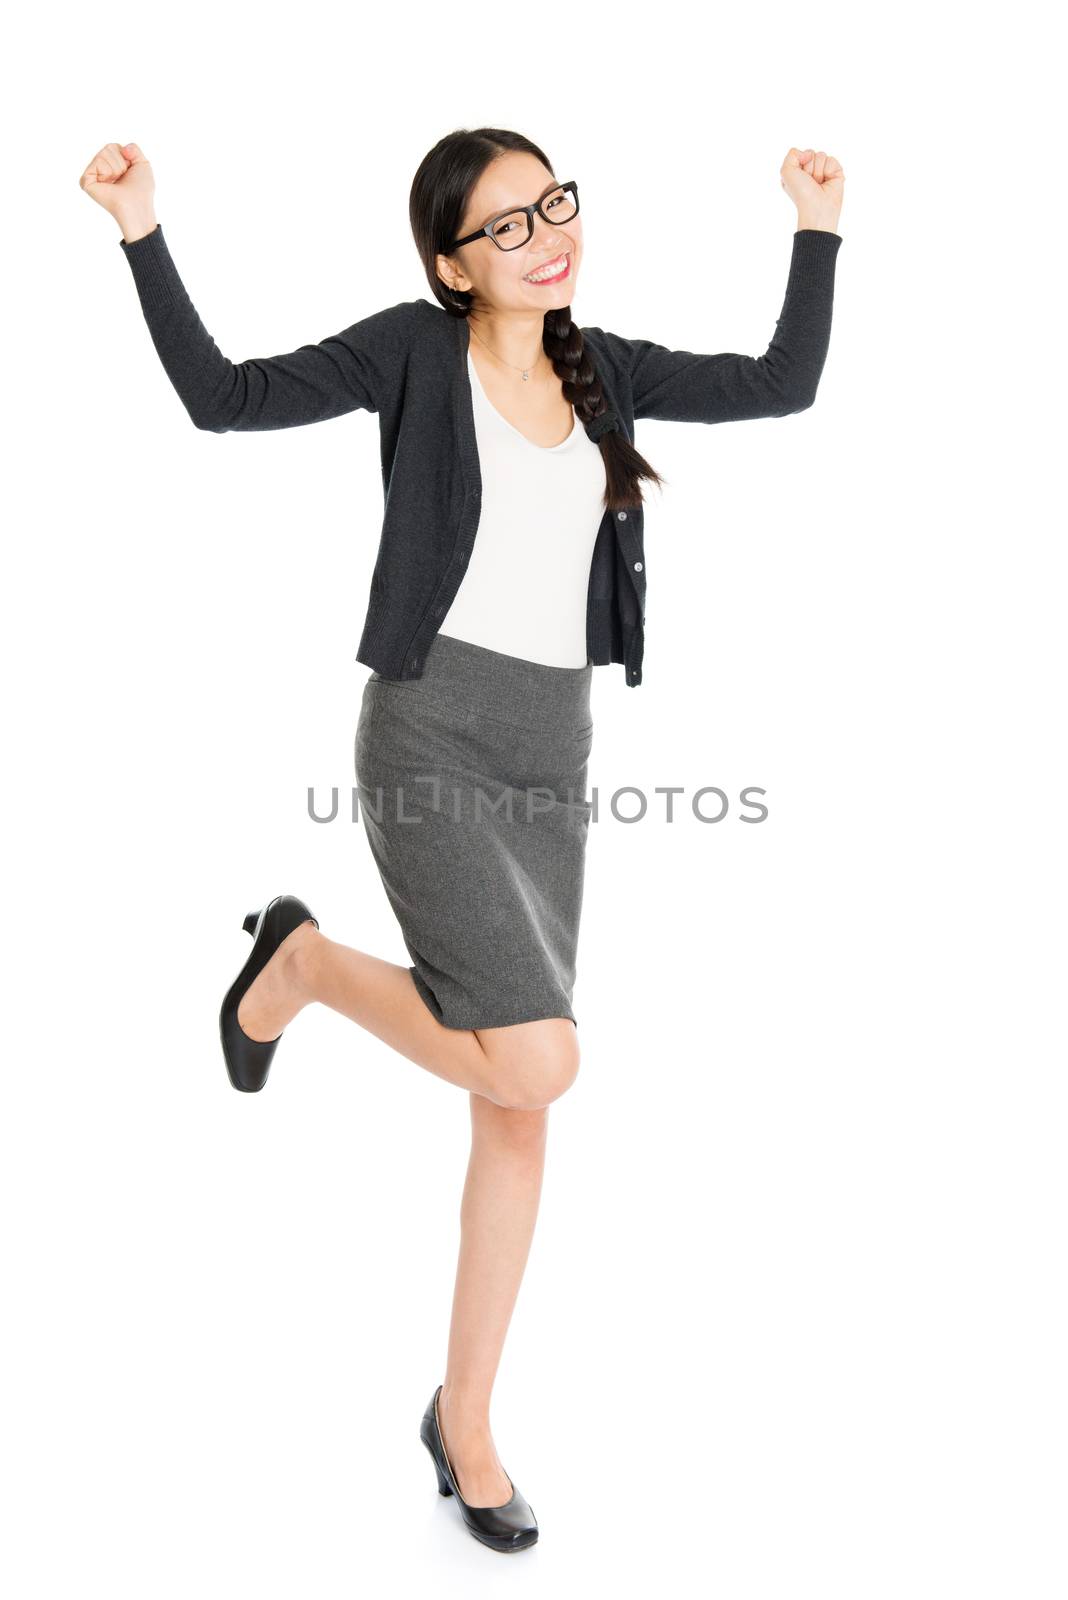 Full length portrait of young Asian female arms raised and jumping around, isolated on white background.